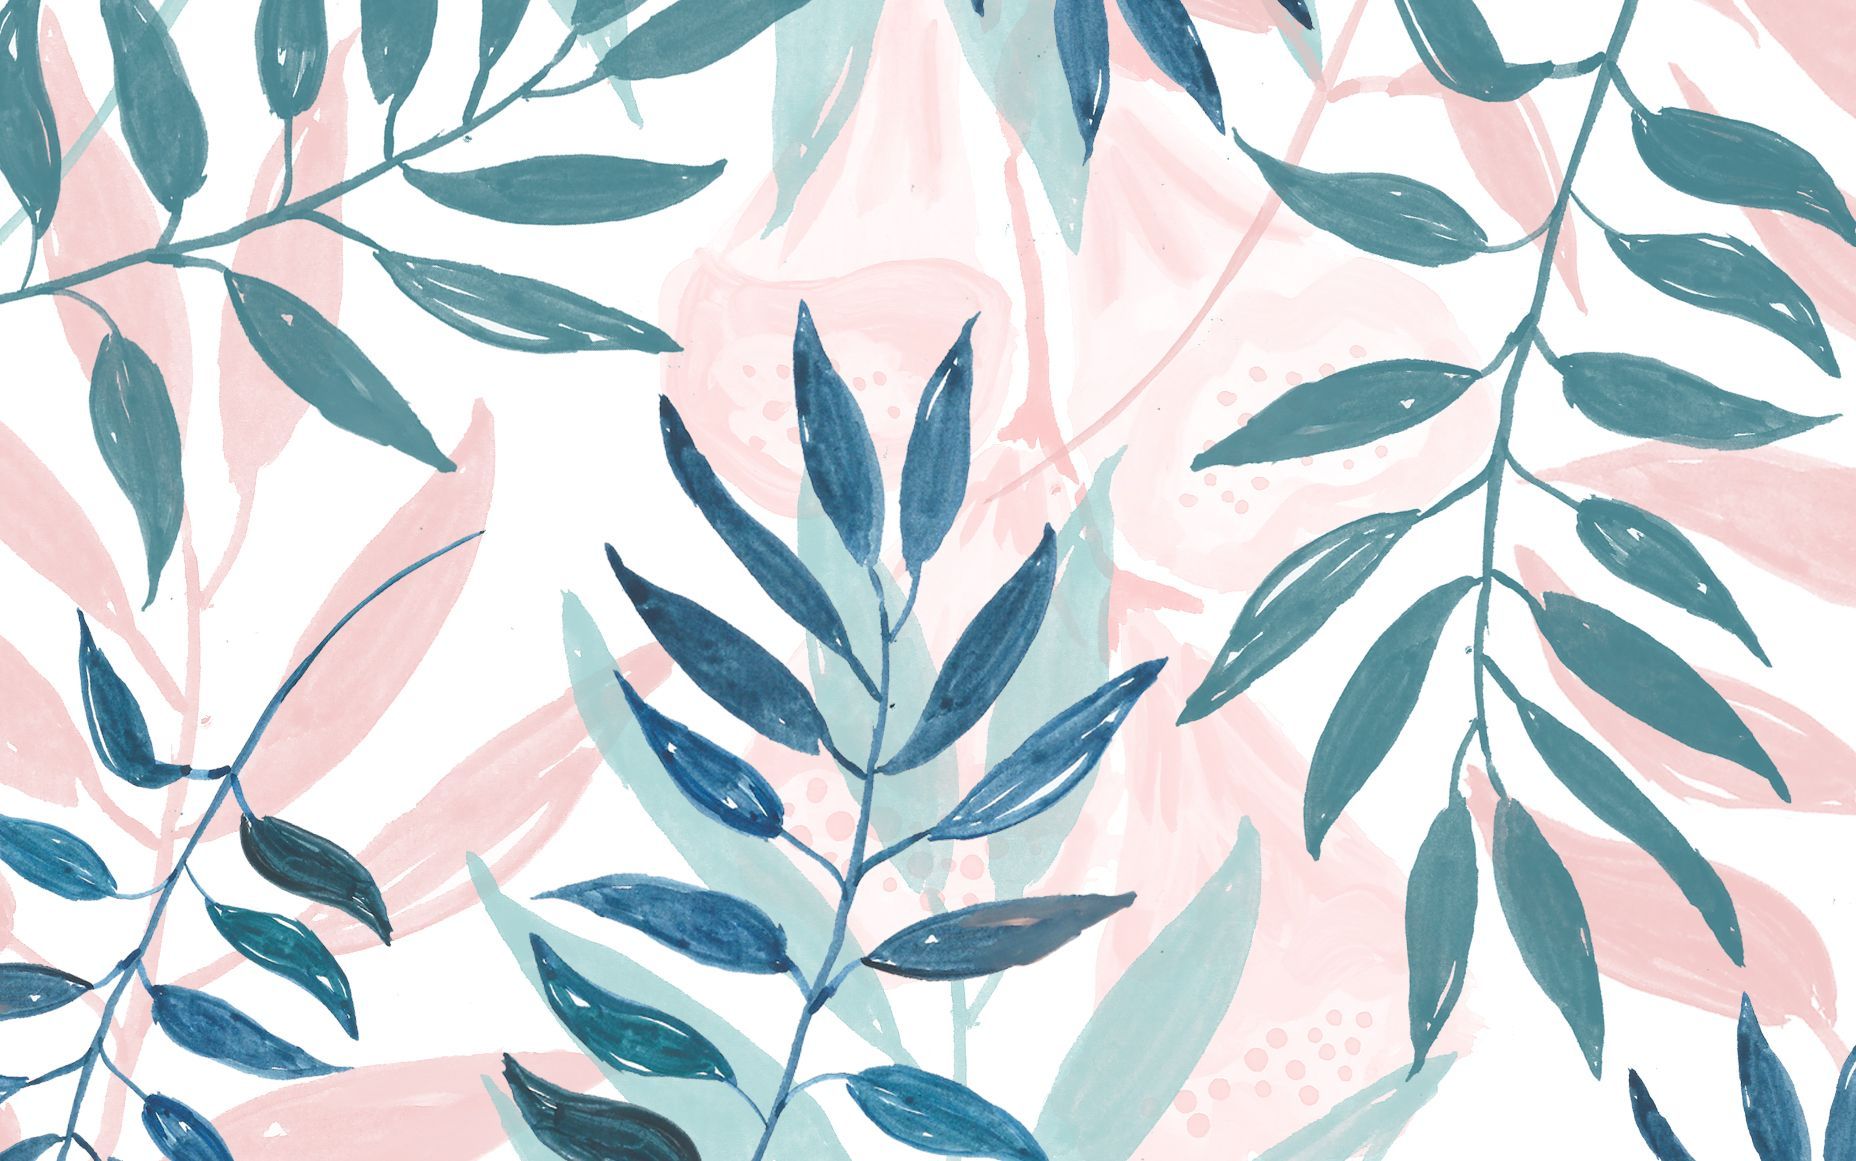 A pattern of blue and pink leaves - Leaves